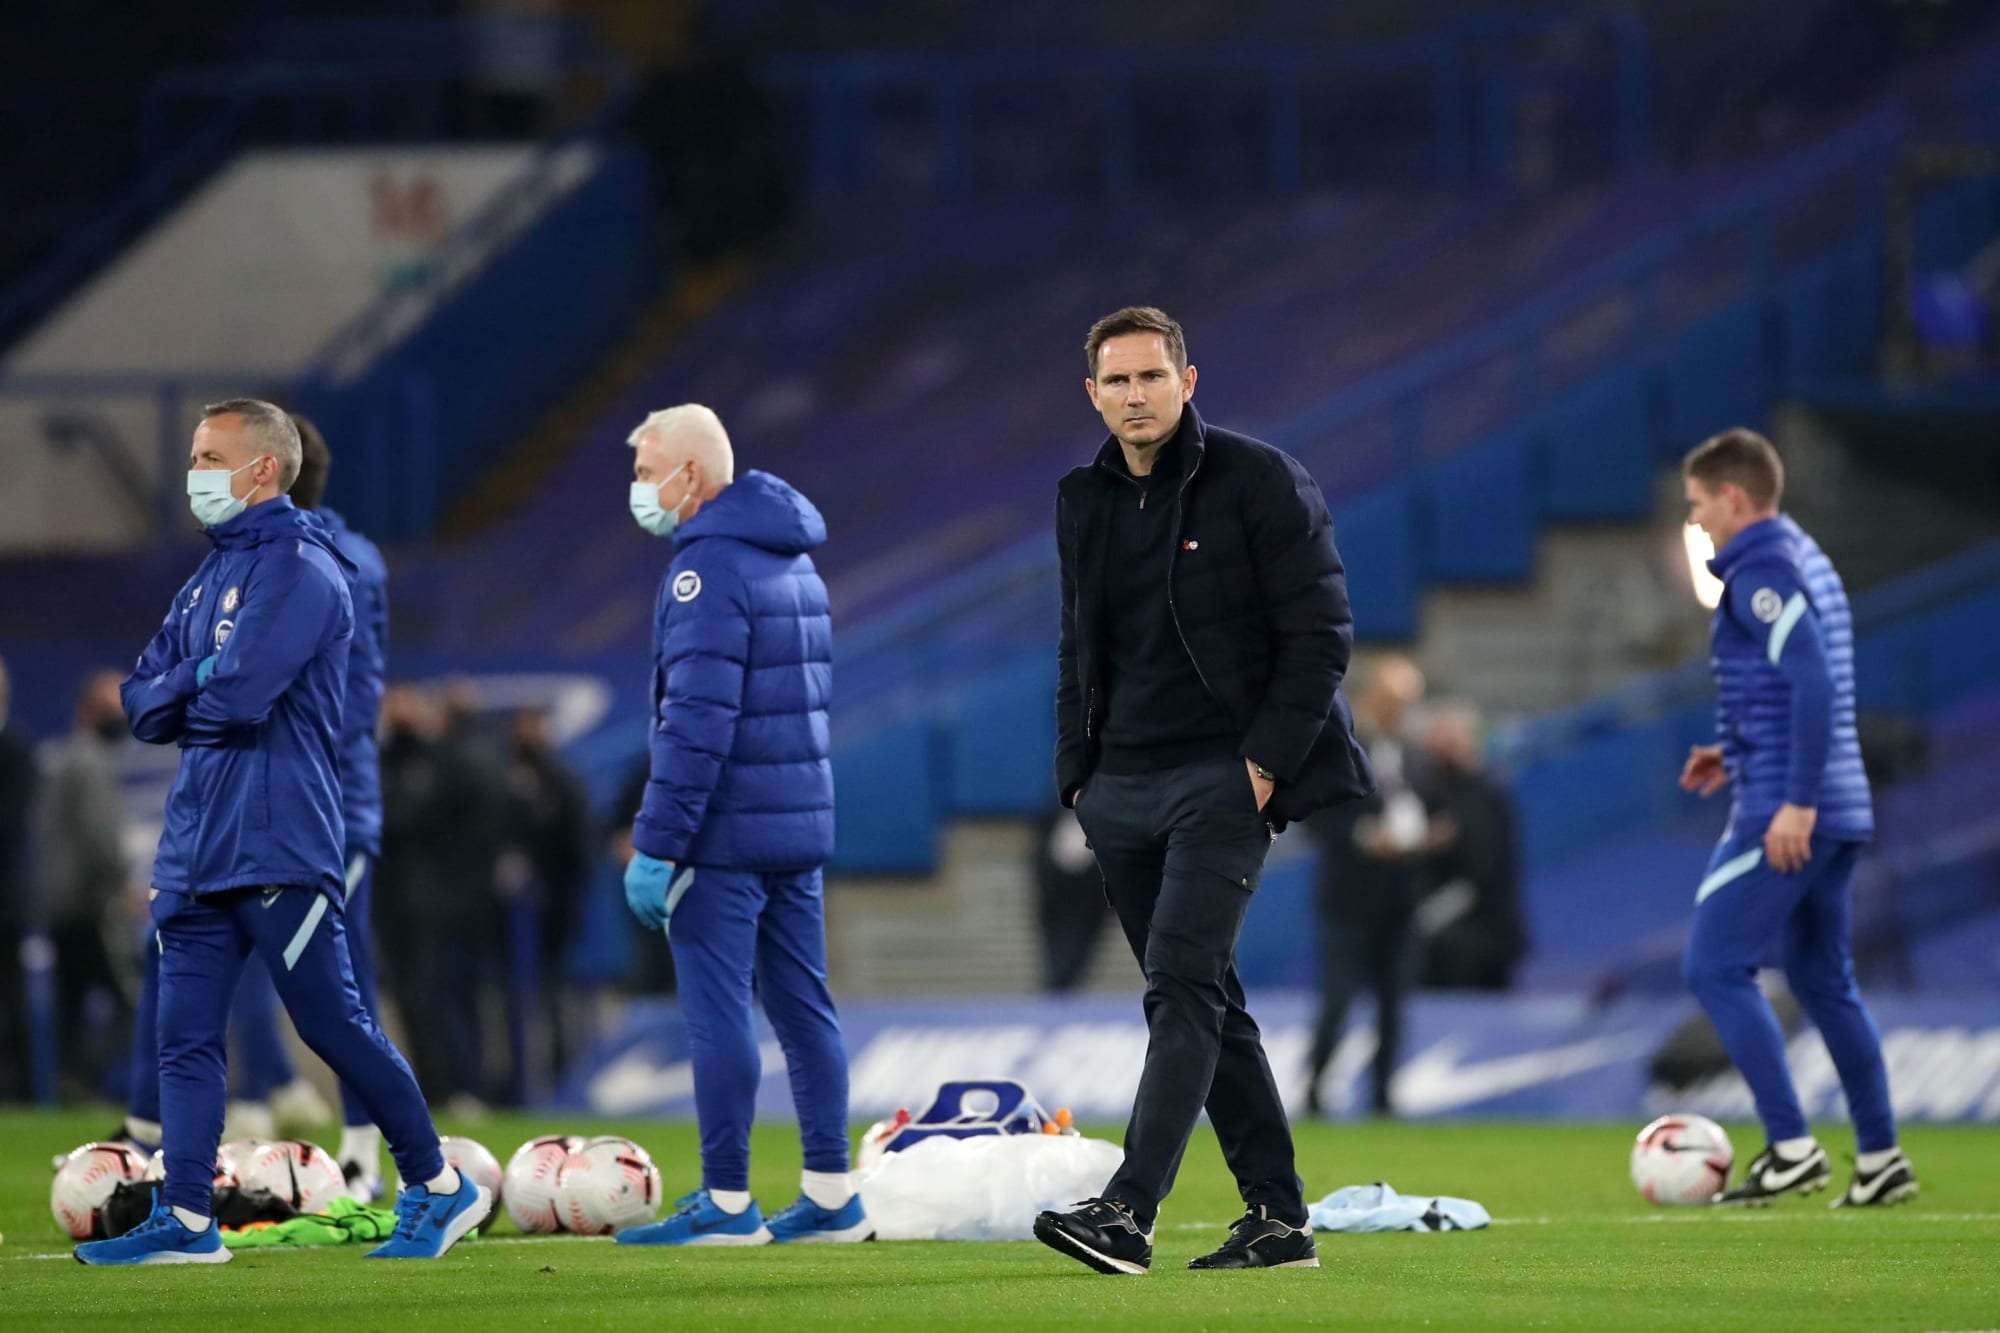 Everton fans protested against the club’s hierarchy as Jarrod Bowen’s double condemned their team to defeat, but the board responded by dismissing Lampard, a former Chelsea manager.